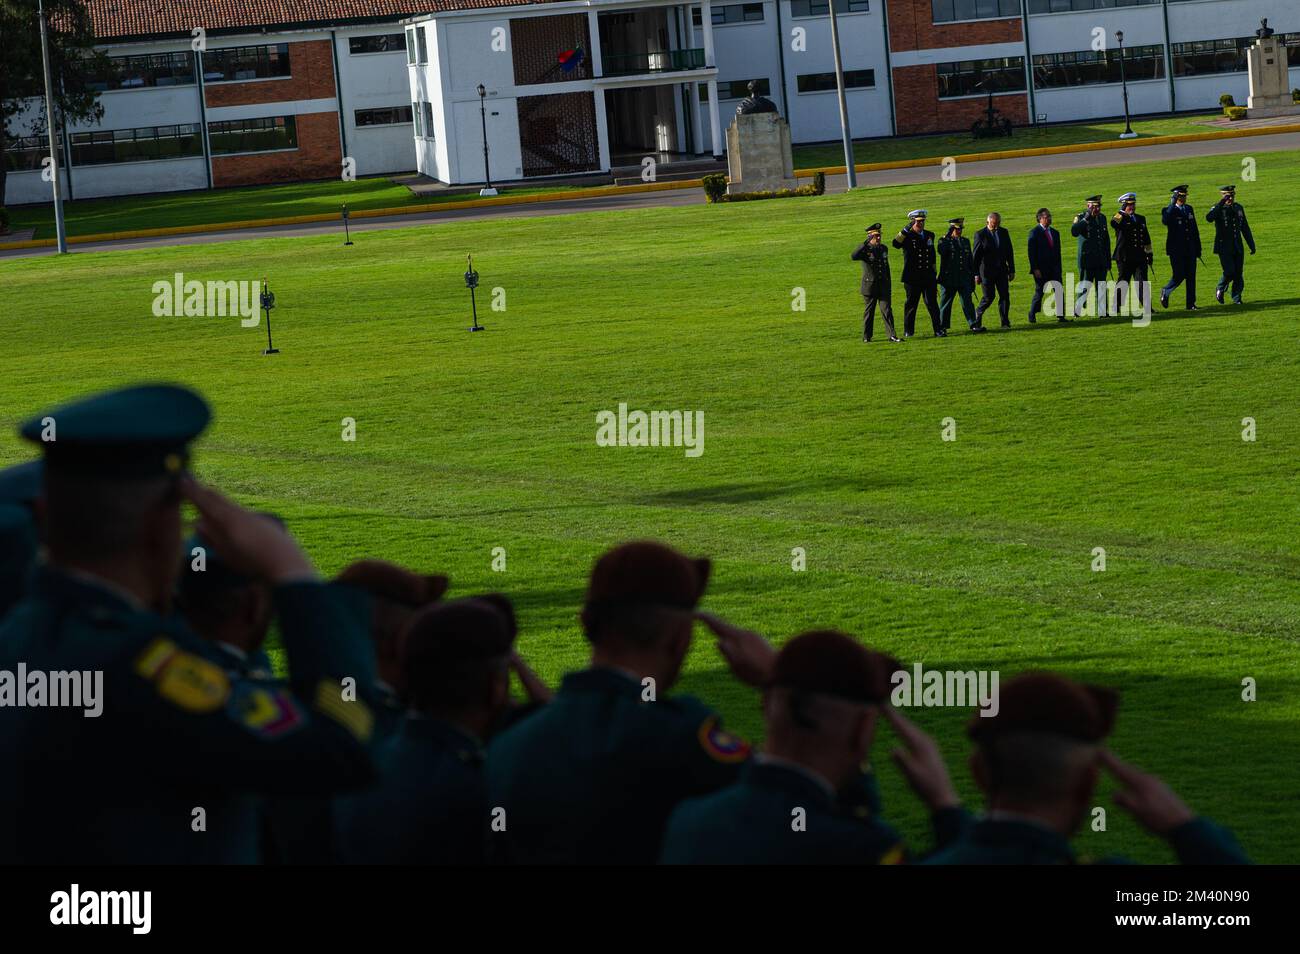 Bogota, Colombia. 17th Dec, 2022. during the promotion ceremony of new Generals and Admirals of the Police and Military Forces at the Jose Maria Cordova Military School in Bogota, Colombia on December 17, 2022. Photo by: S. Barros/Long Visual Press Credit: Long Visual Press/Alamy Live News Stock Photo